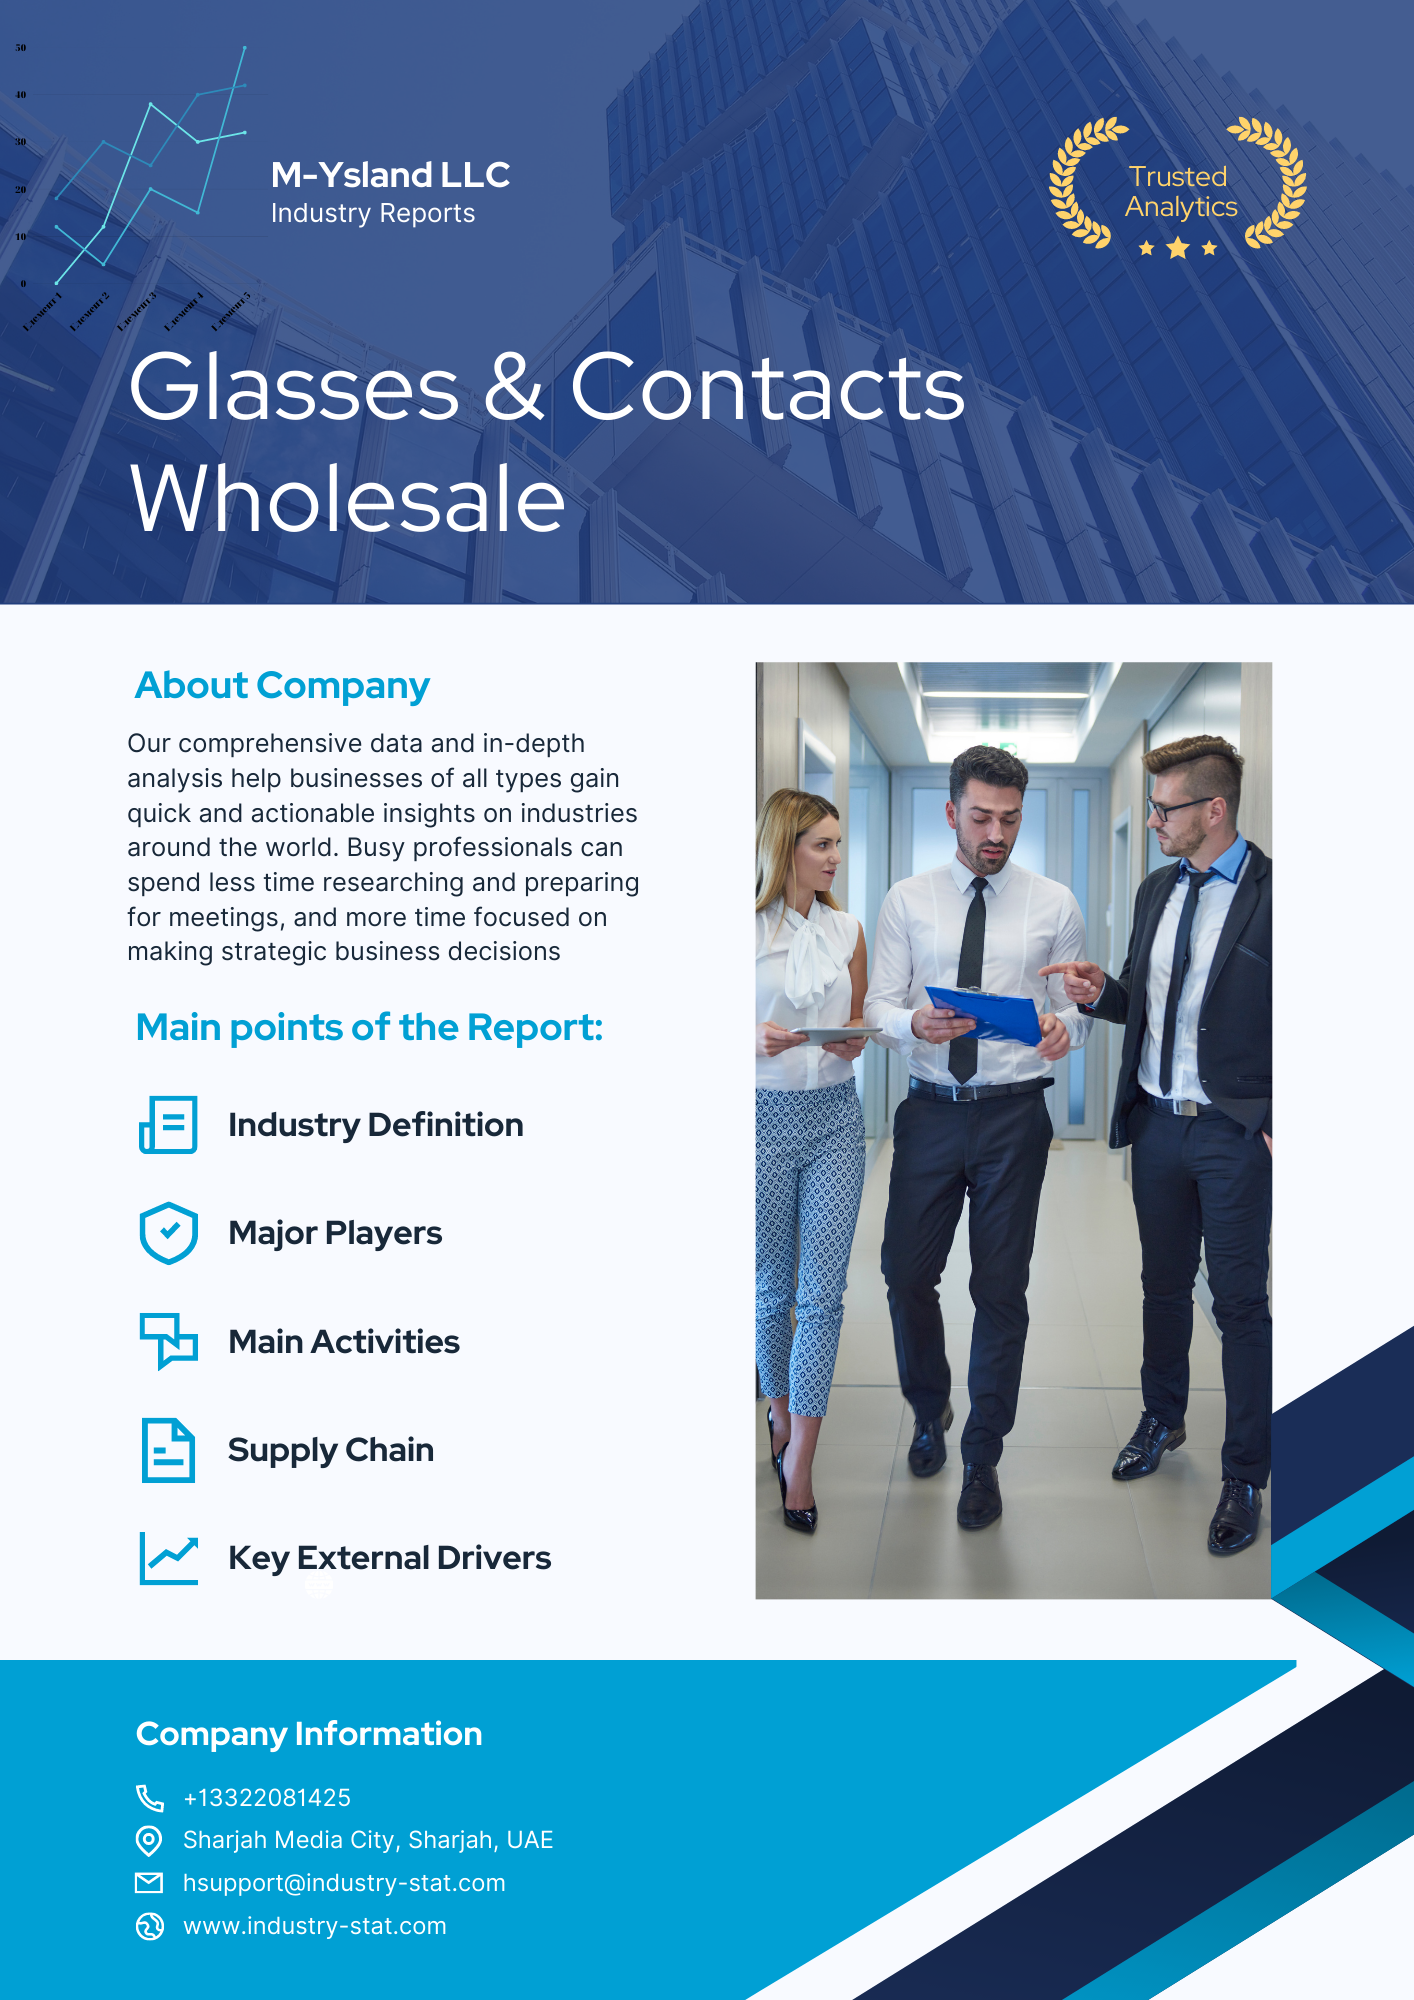 Glasses & Contacts Wholesale